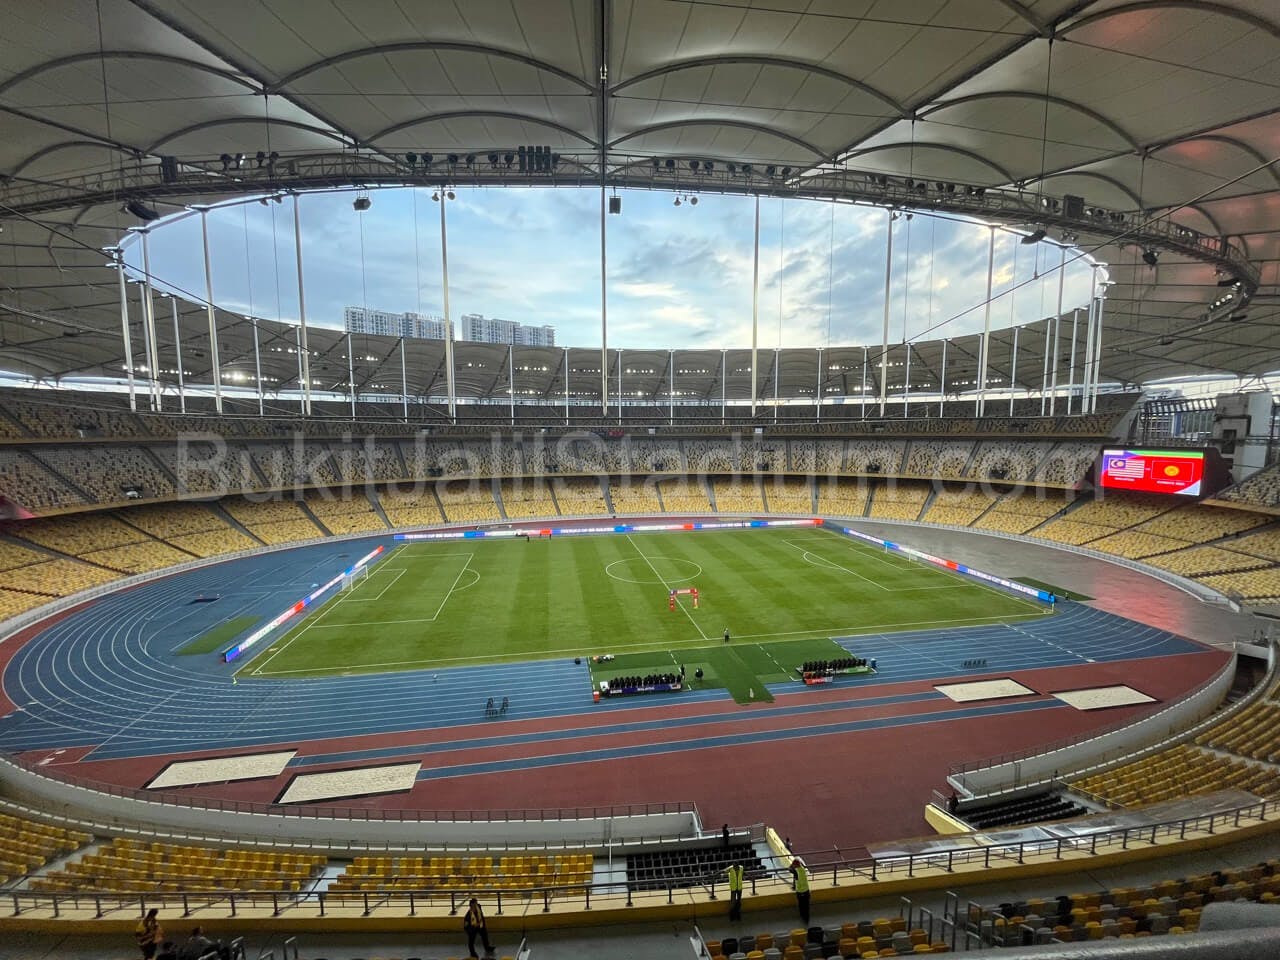 0.5x View of Bukit Jalil field from section 332 of Stadium Bukit Jalil.